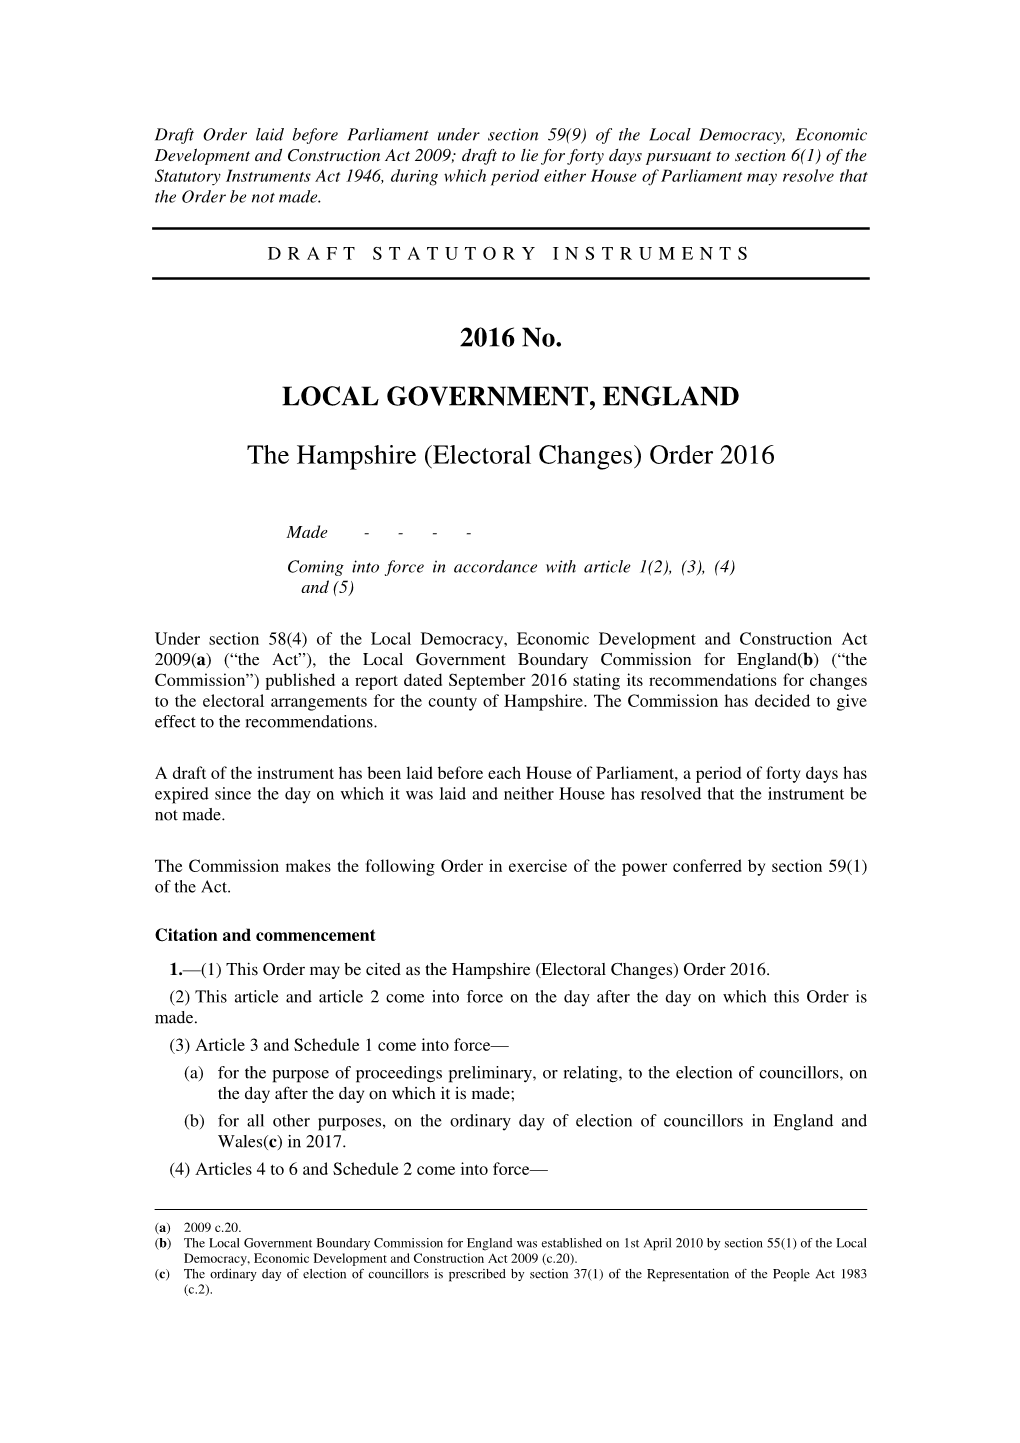 The Hampshire (Electoral Changes) Order 2016